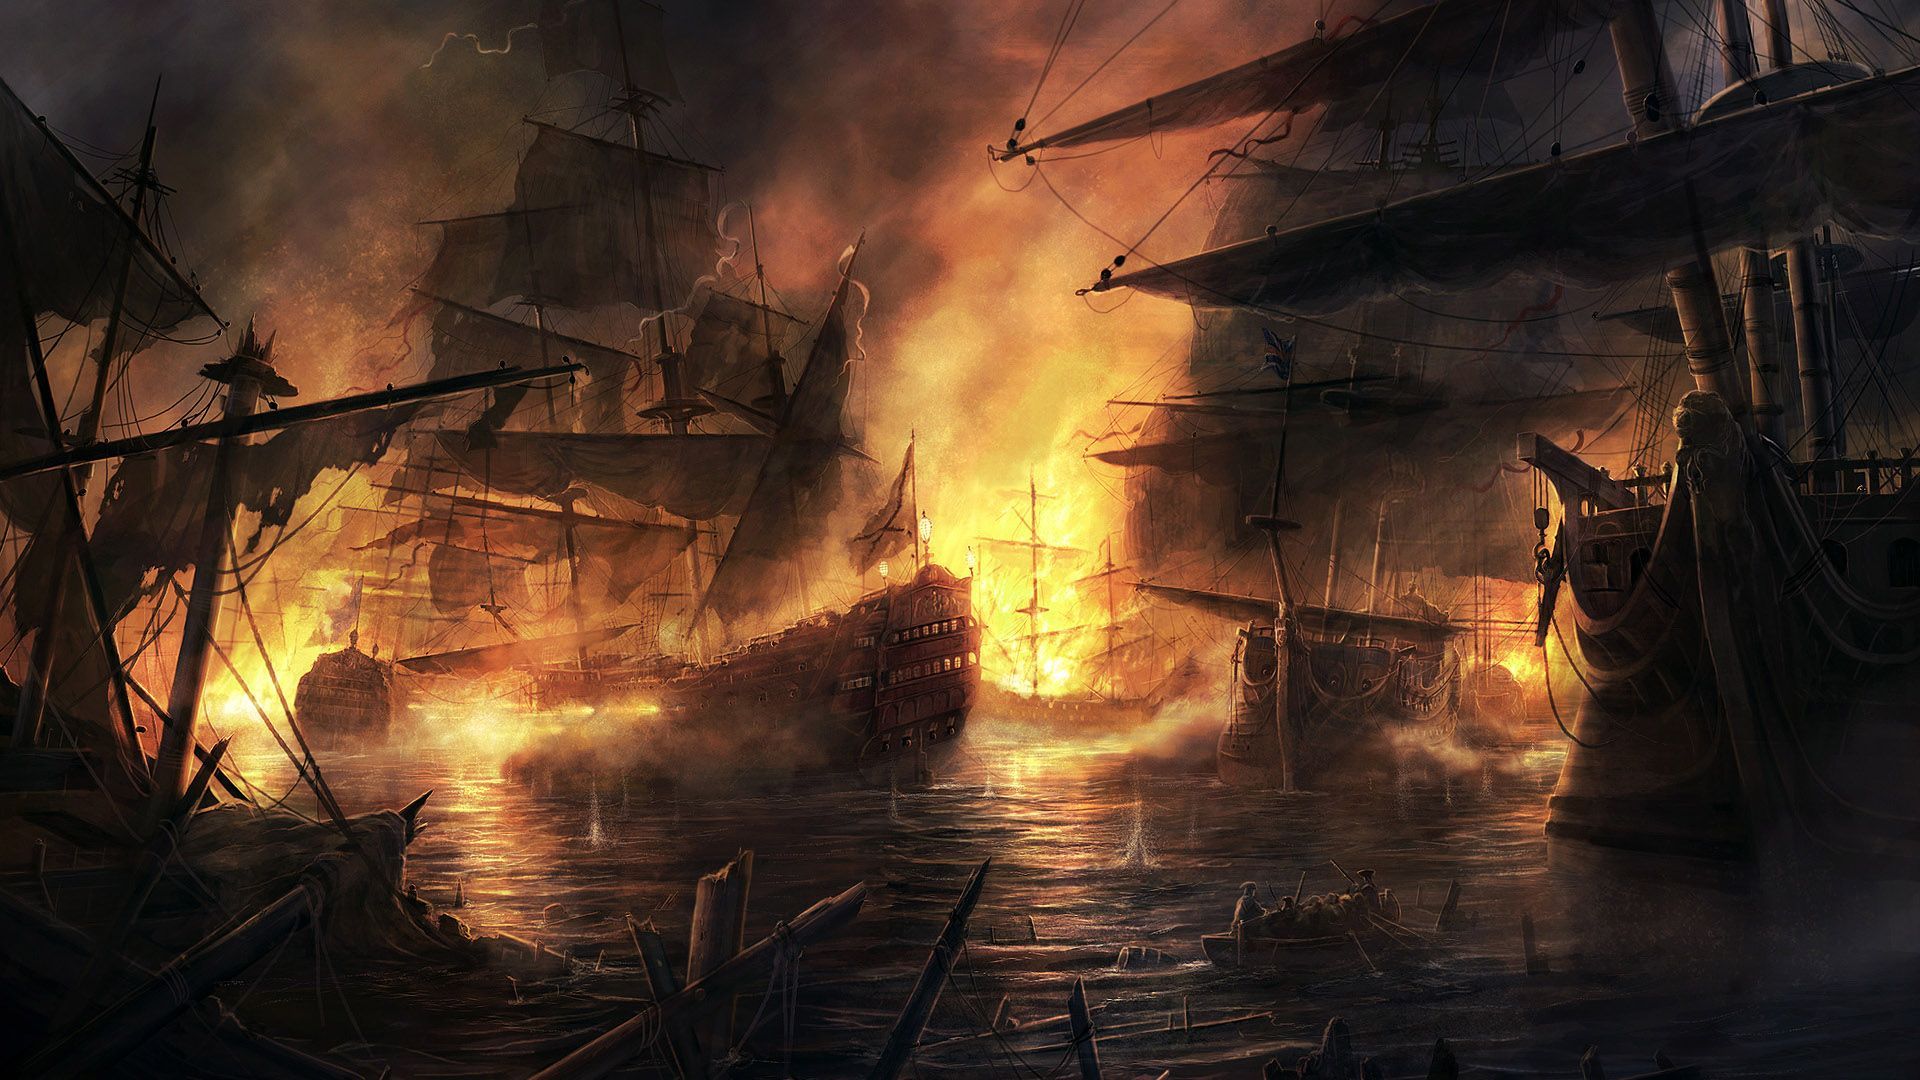 Sea Pirate Wallpapers Best Backgrounds